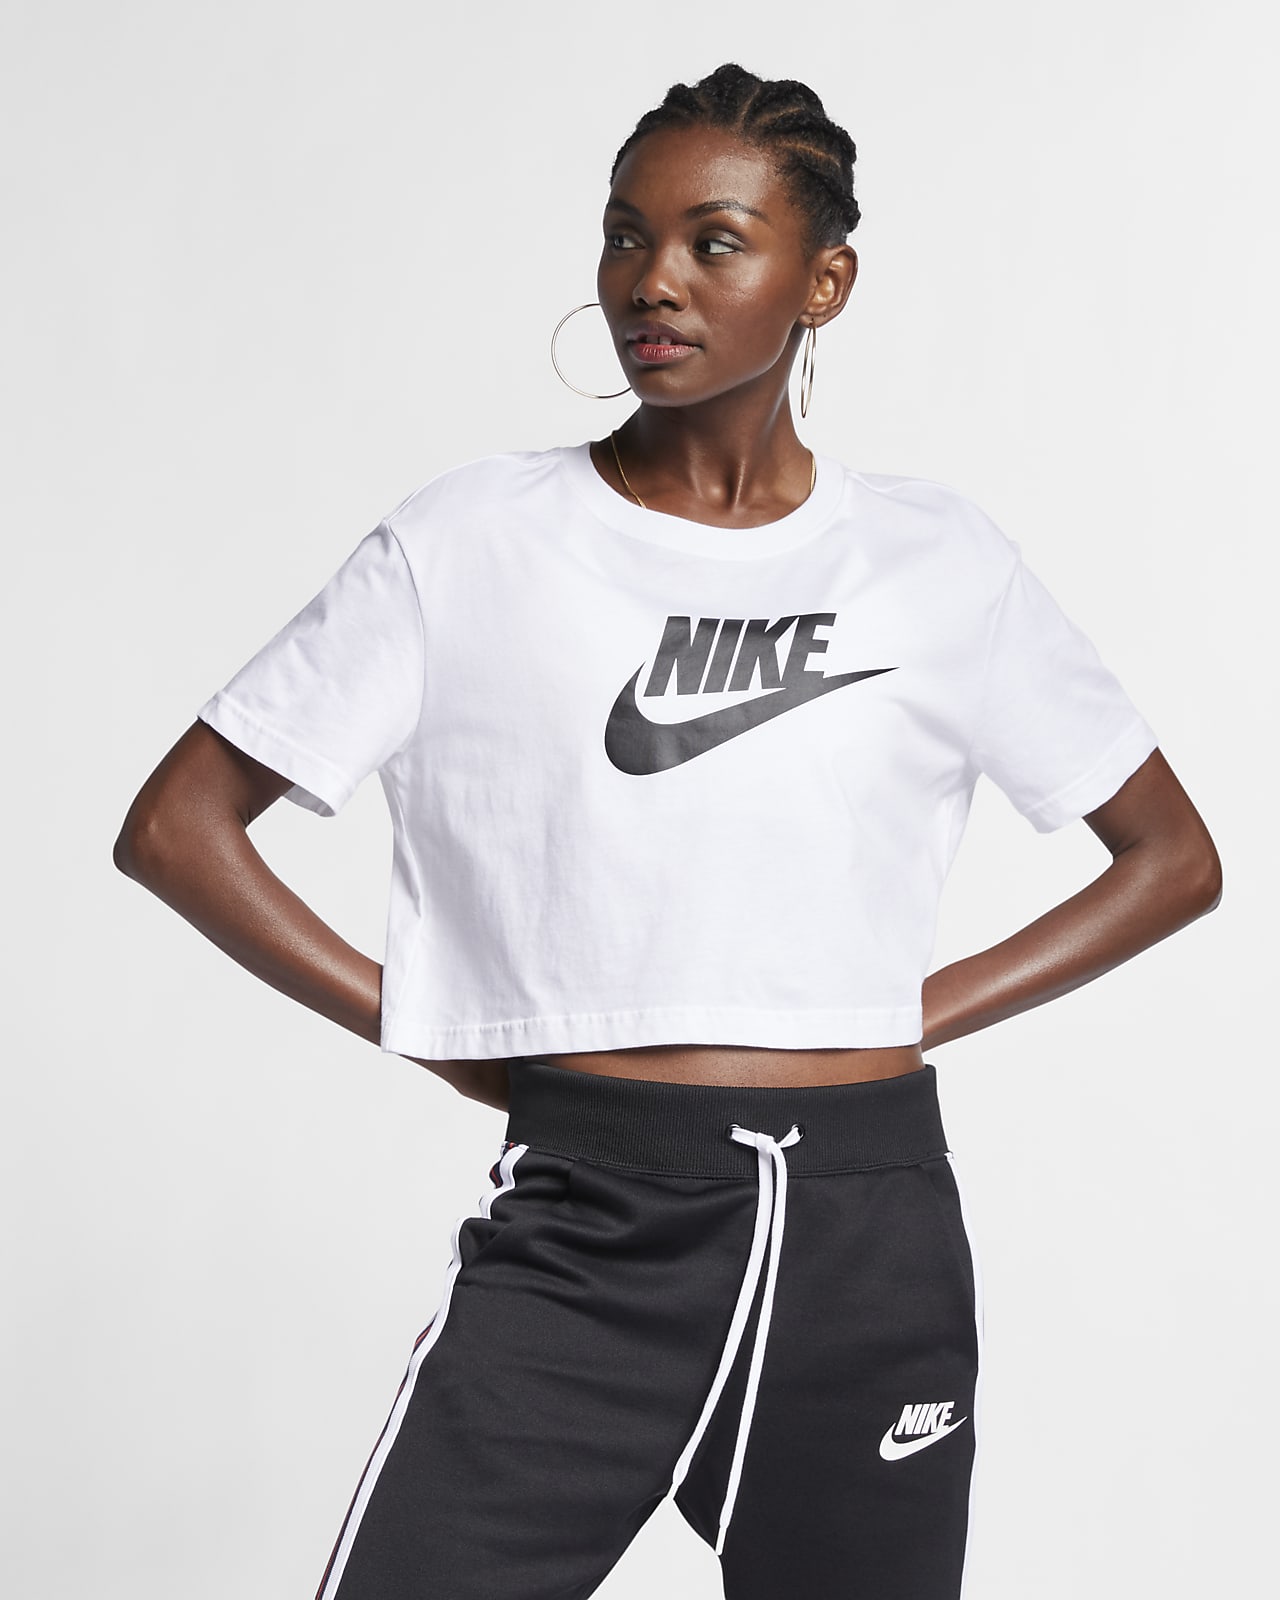 nike crop top with shorts